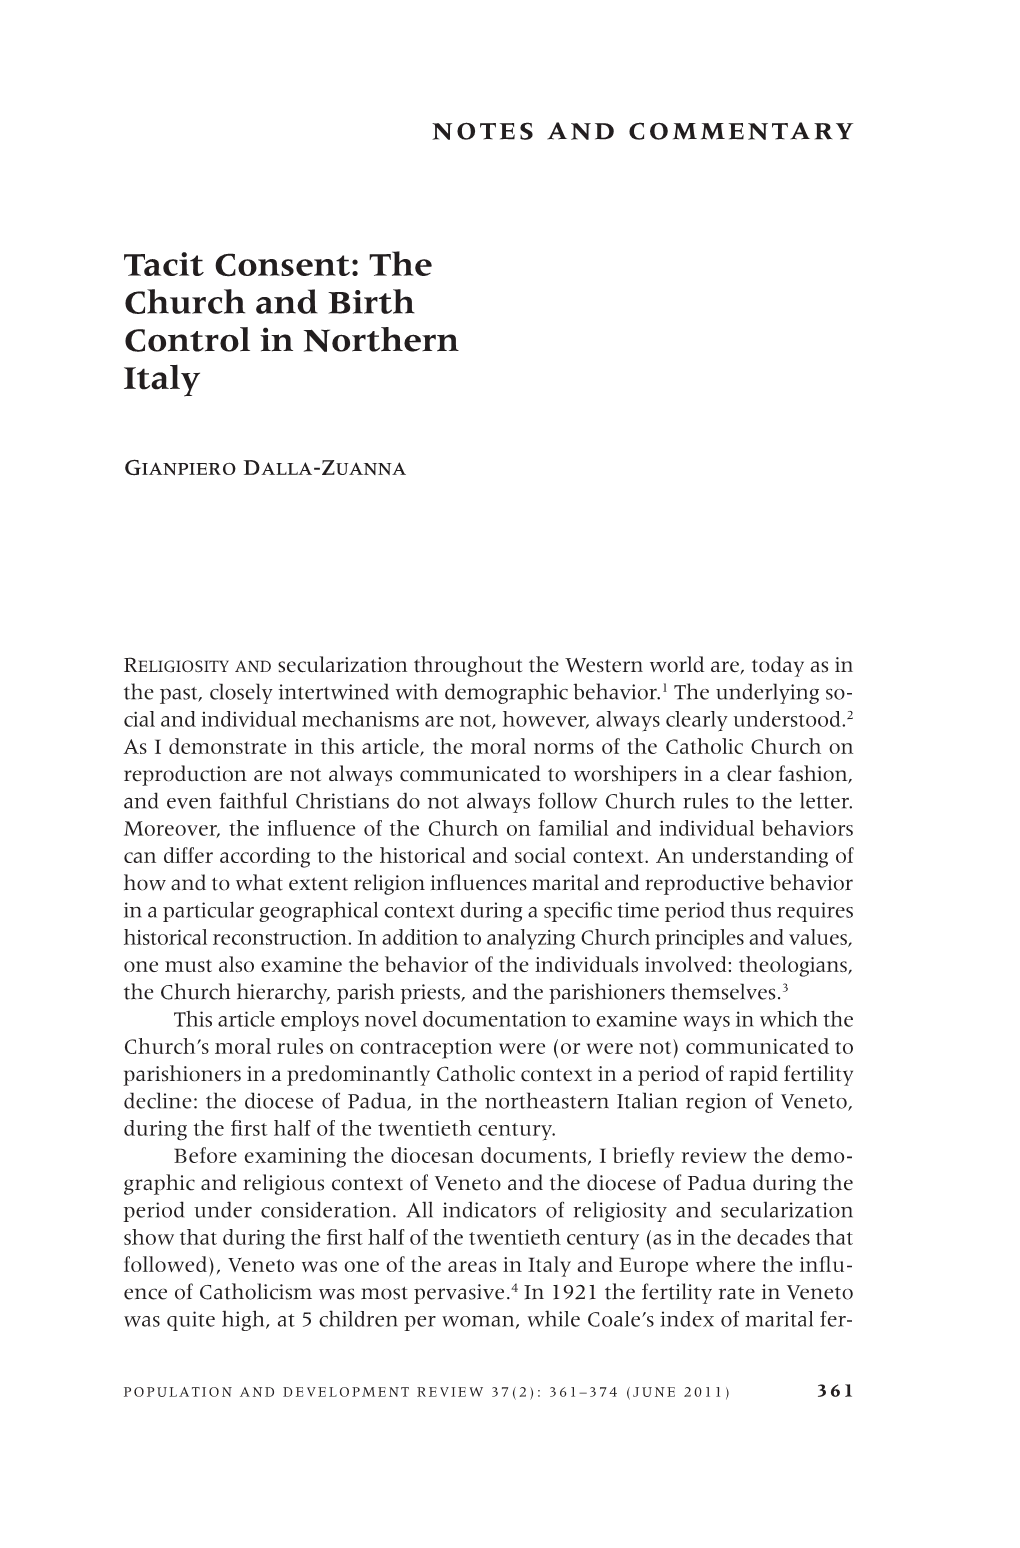 Tacit Consent: the Church and Birth Control in Northern Italy